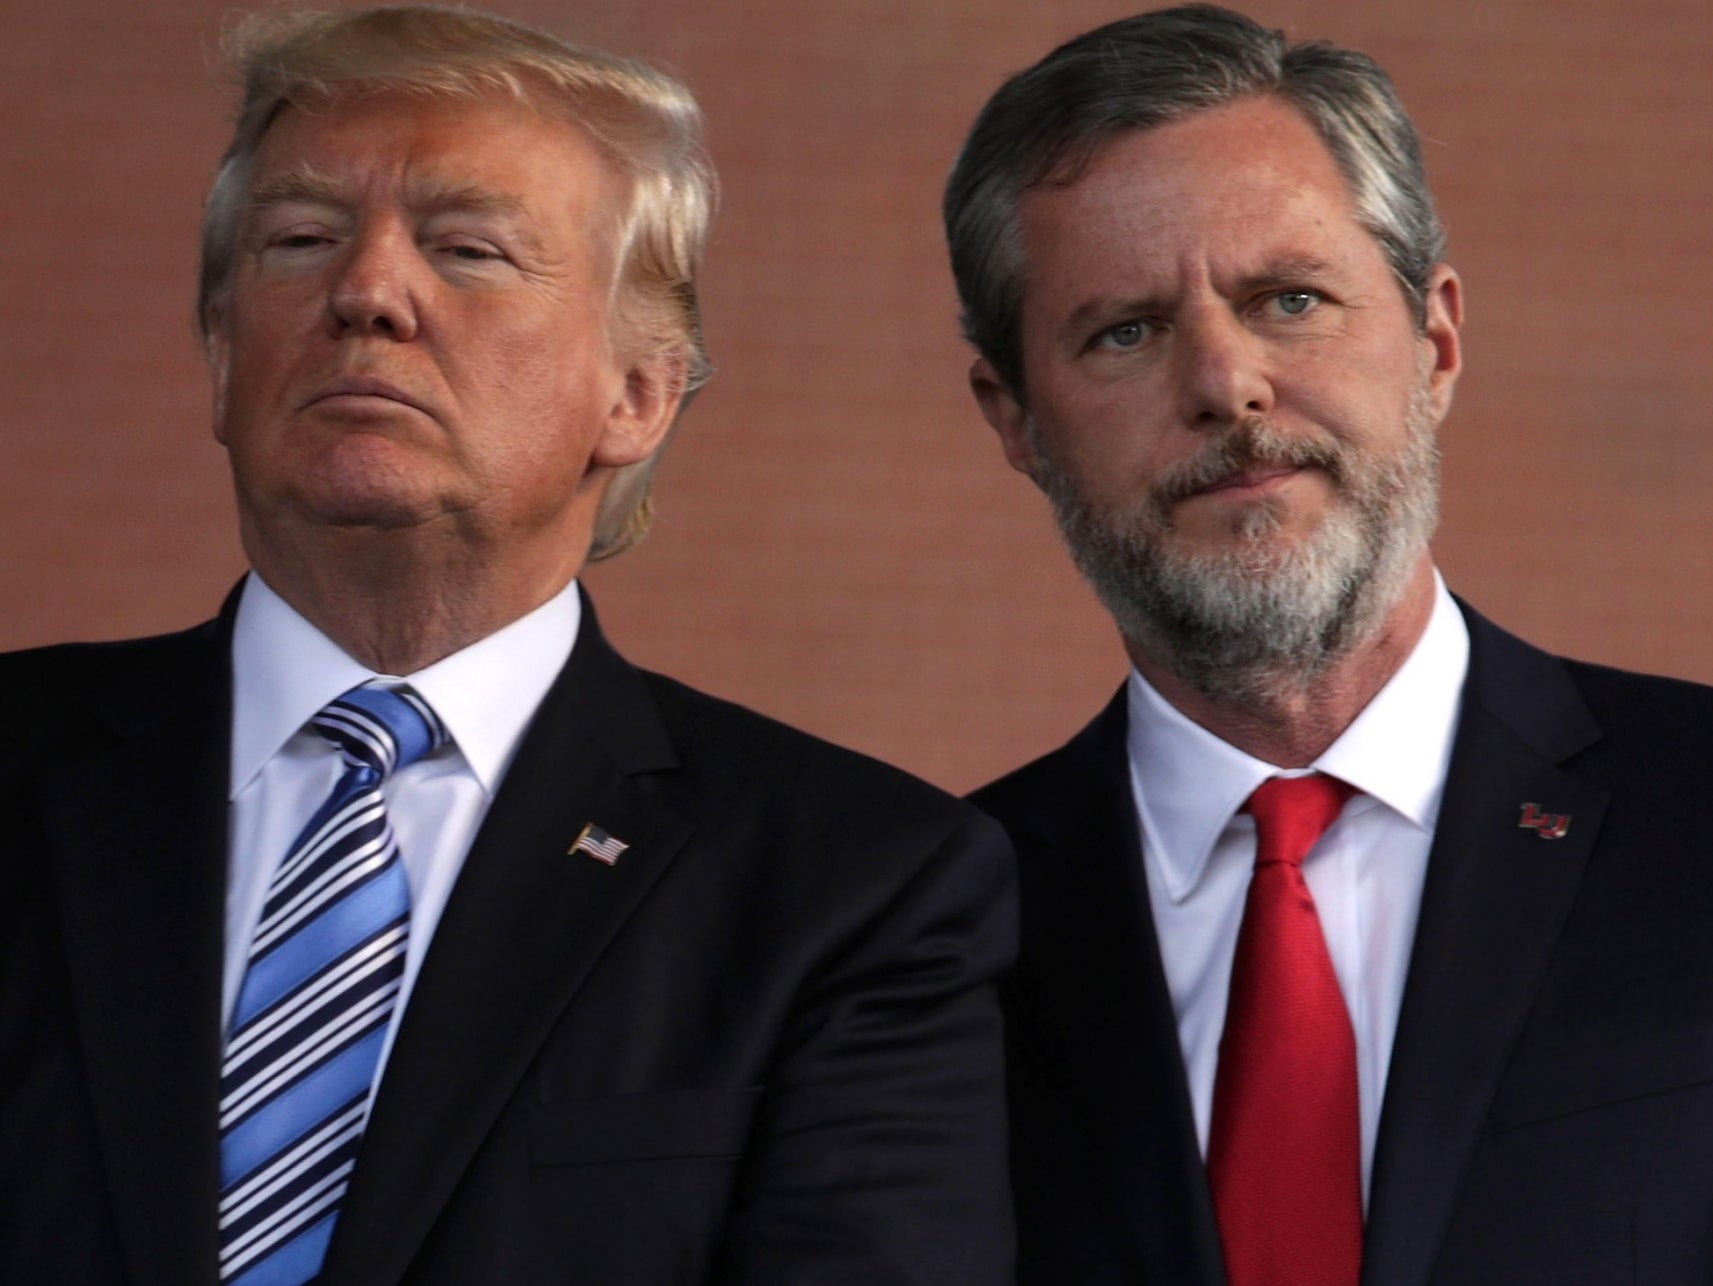 Trump and Falwell on stage during a commencement at Liberty University in 2017